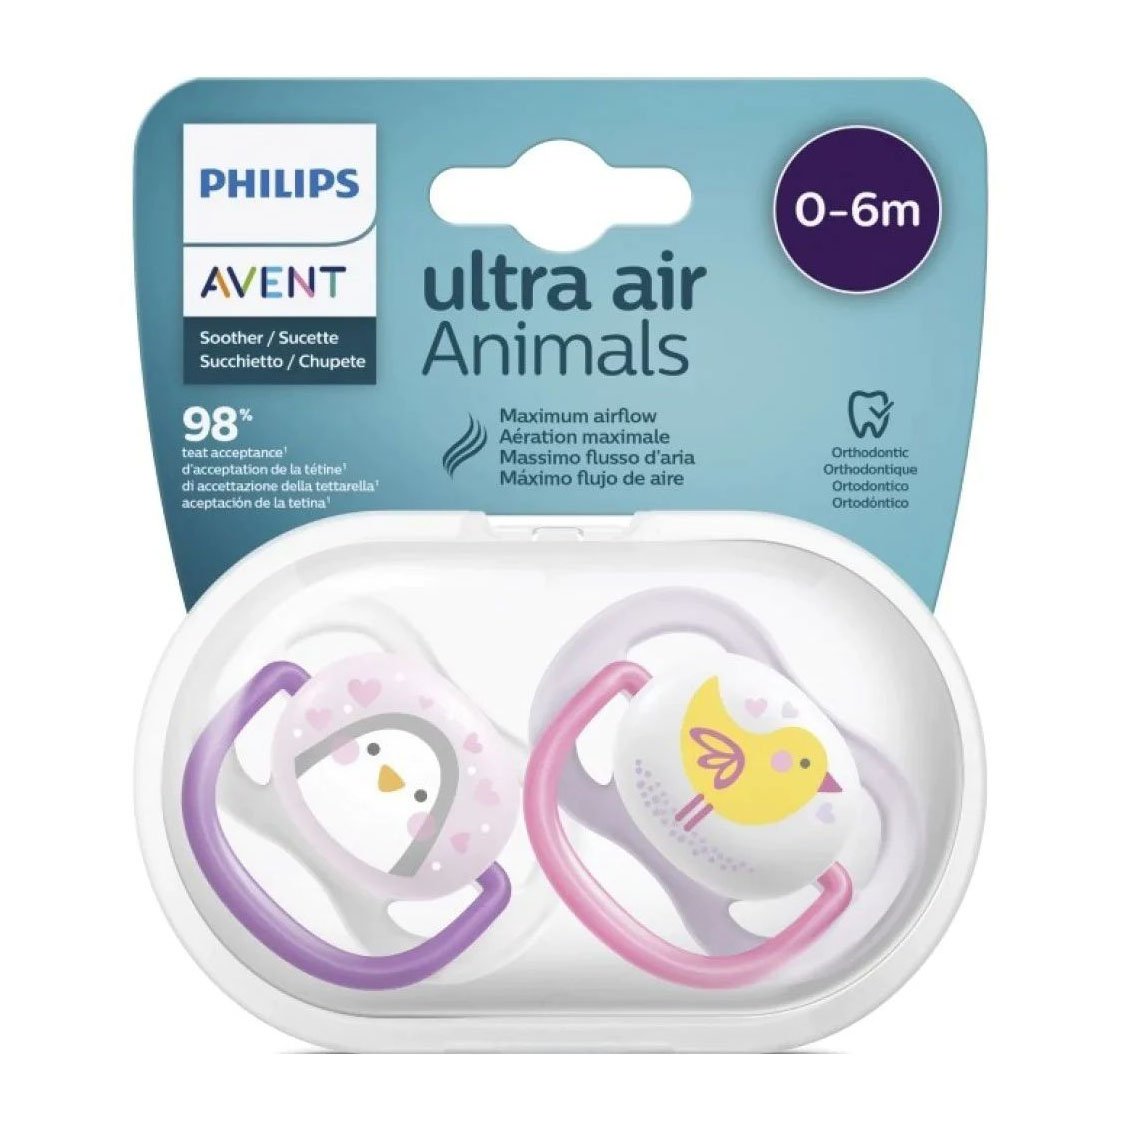 Avent Ultra Air Animals Pacifier 0-6m – Purple - Bloom Pharmacy